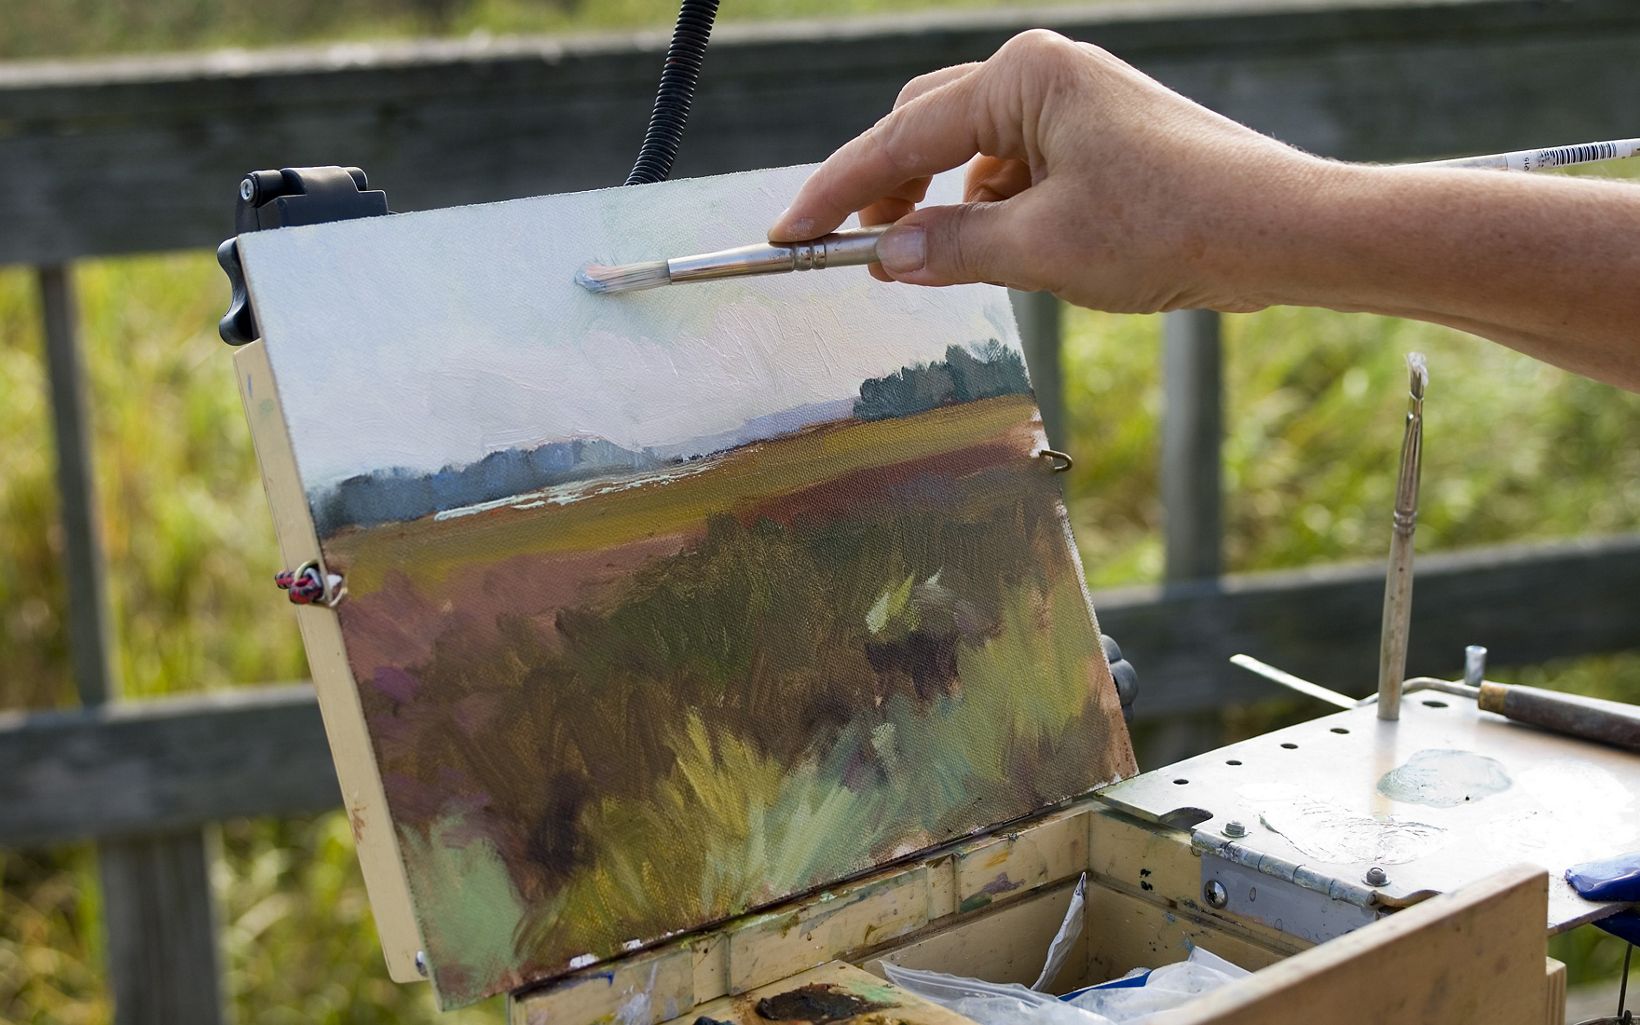 Close view of a small canvas being painted in the open air. The canvas shows an open wetland scene. A hand holds a brush adding color to the sky.